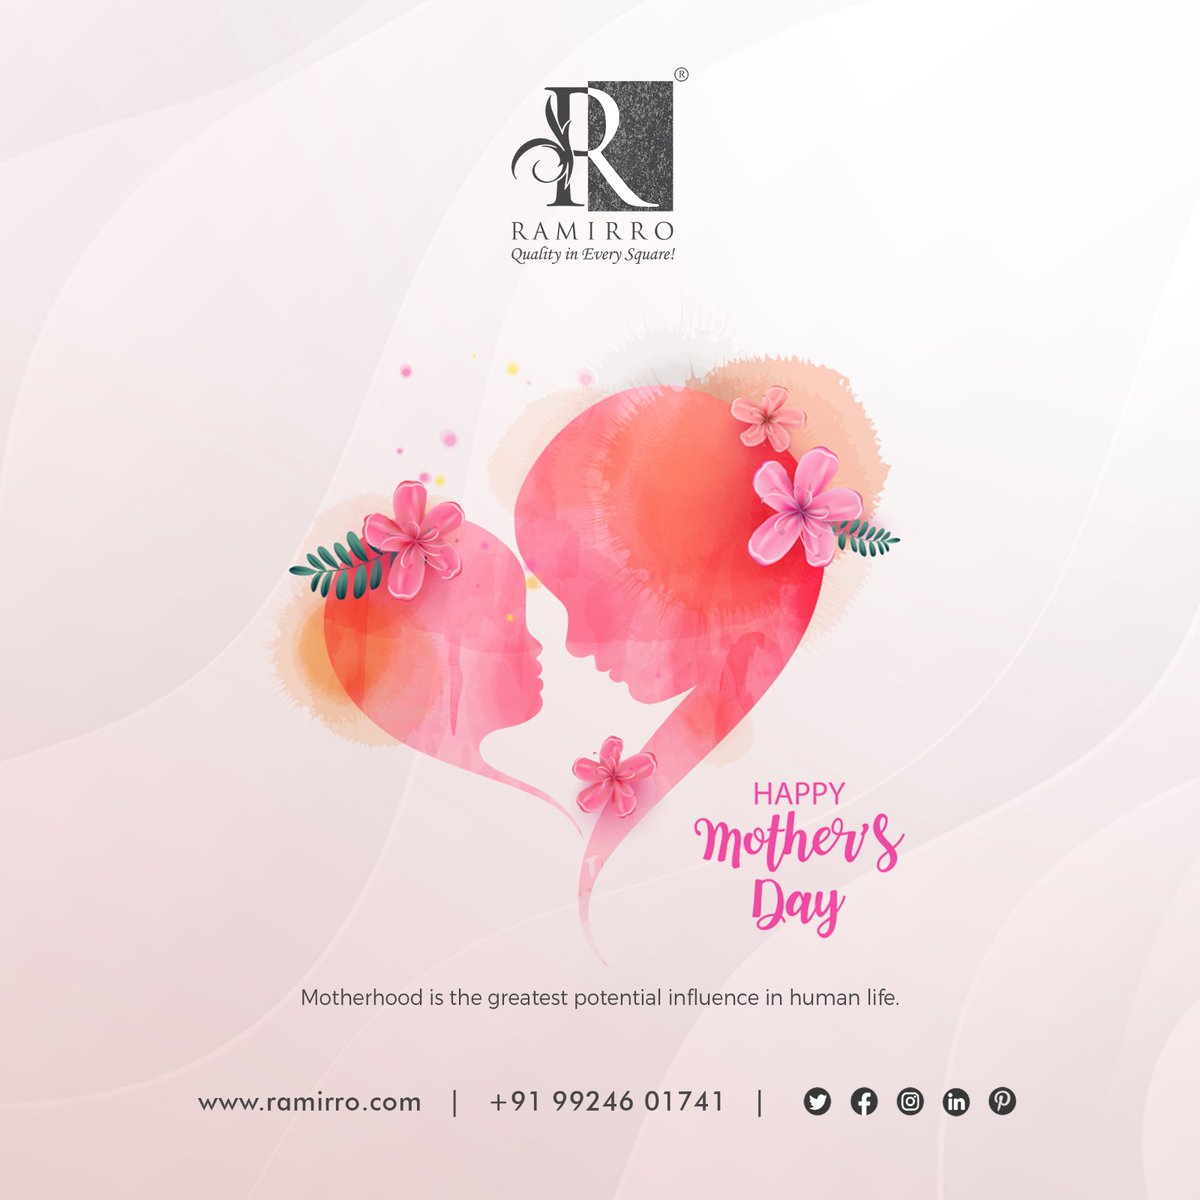 Mother love is the fuel that enables a normal human being to do the impossible.
Happy Mother’s Day

#happymothersday #happymothersday2023 #mothersday #mommyandme #motherhoodmatters #supermom #ramirroceramica #ramirro #ceramica #ceramic #porcelaintilesupplier #porcelain